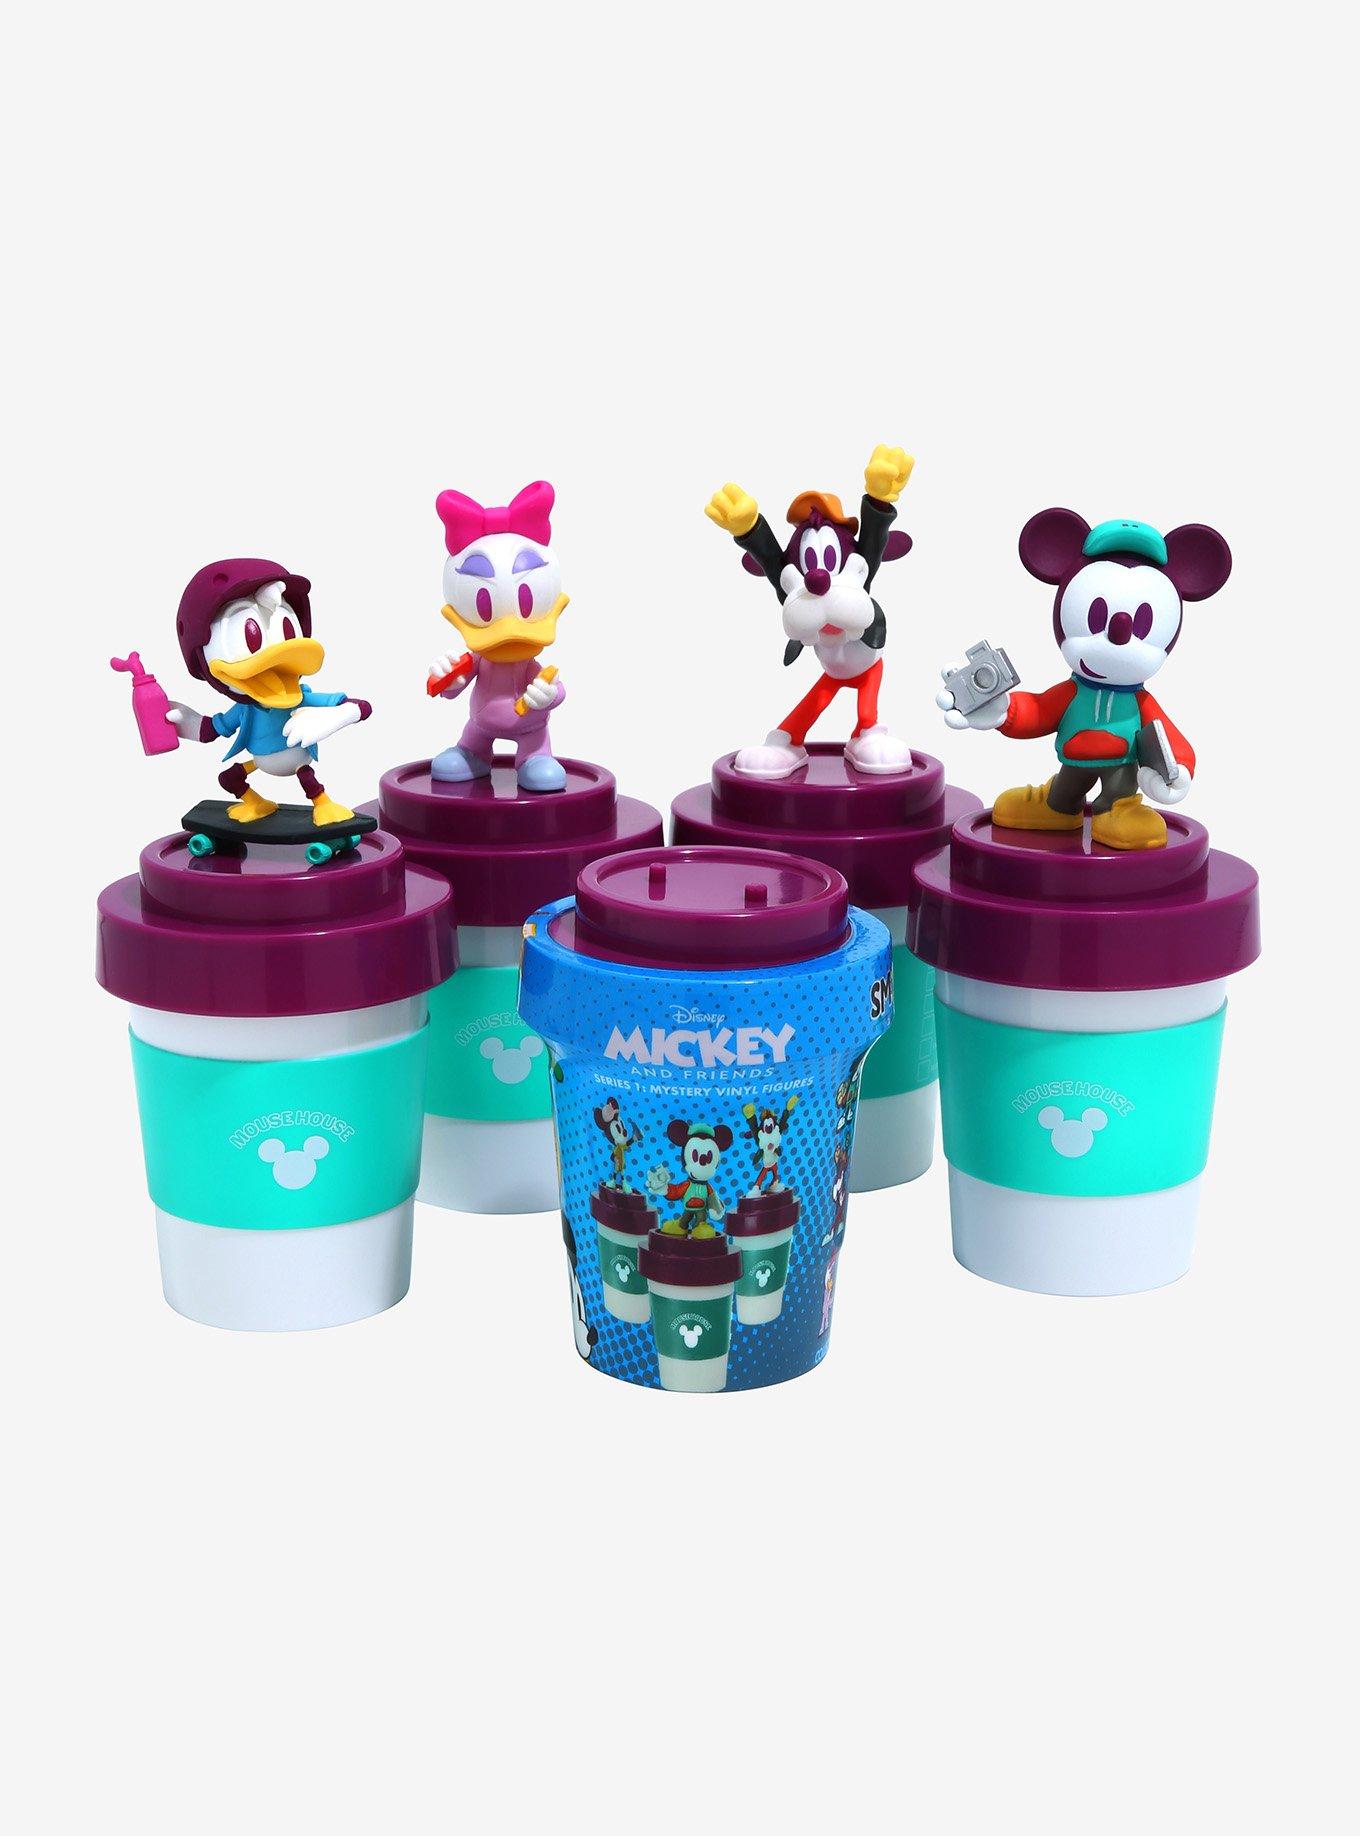 Disney Plastic Cups Set - Mickey Mouse and Friends - Lenticu